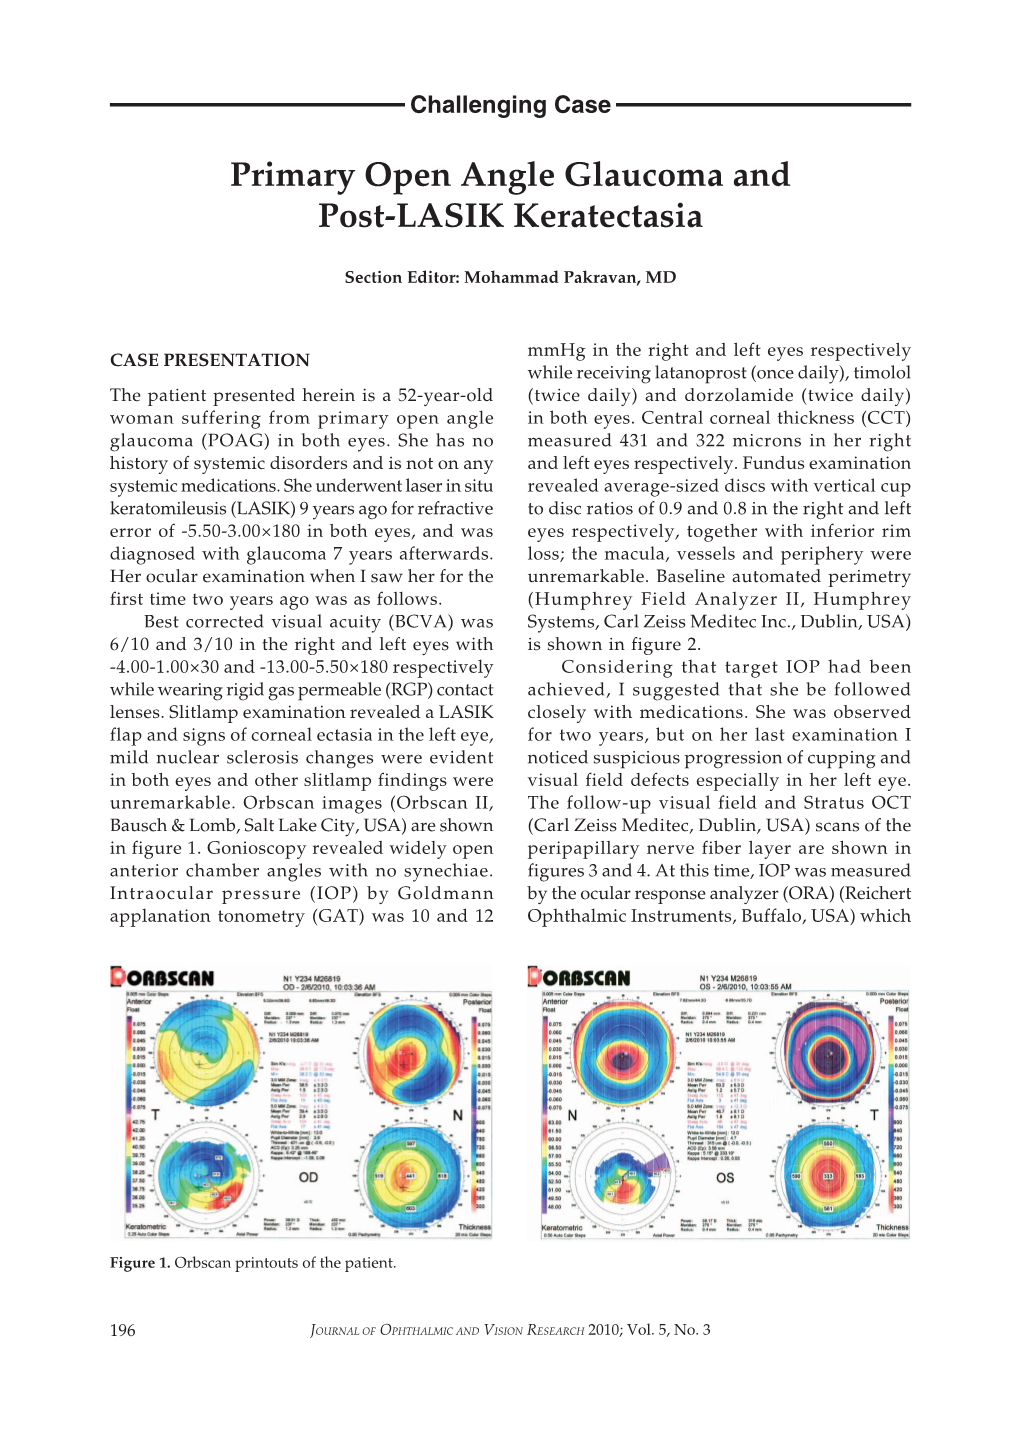 Primary Open Angle Glaucoma and Post-LASIK Keratectasia